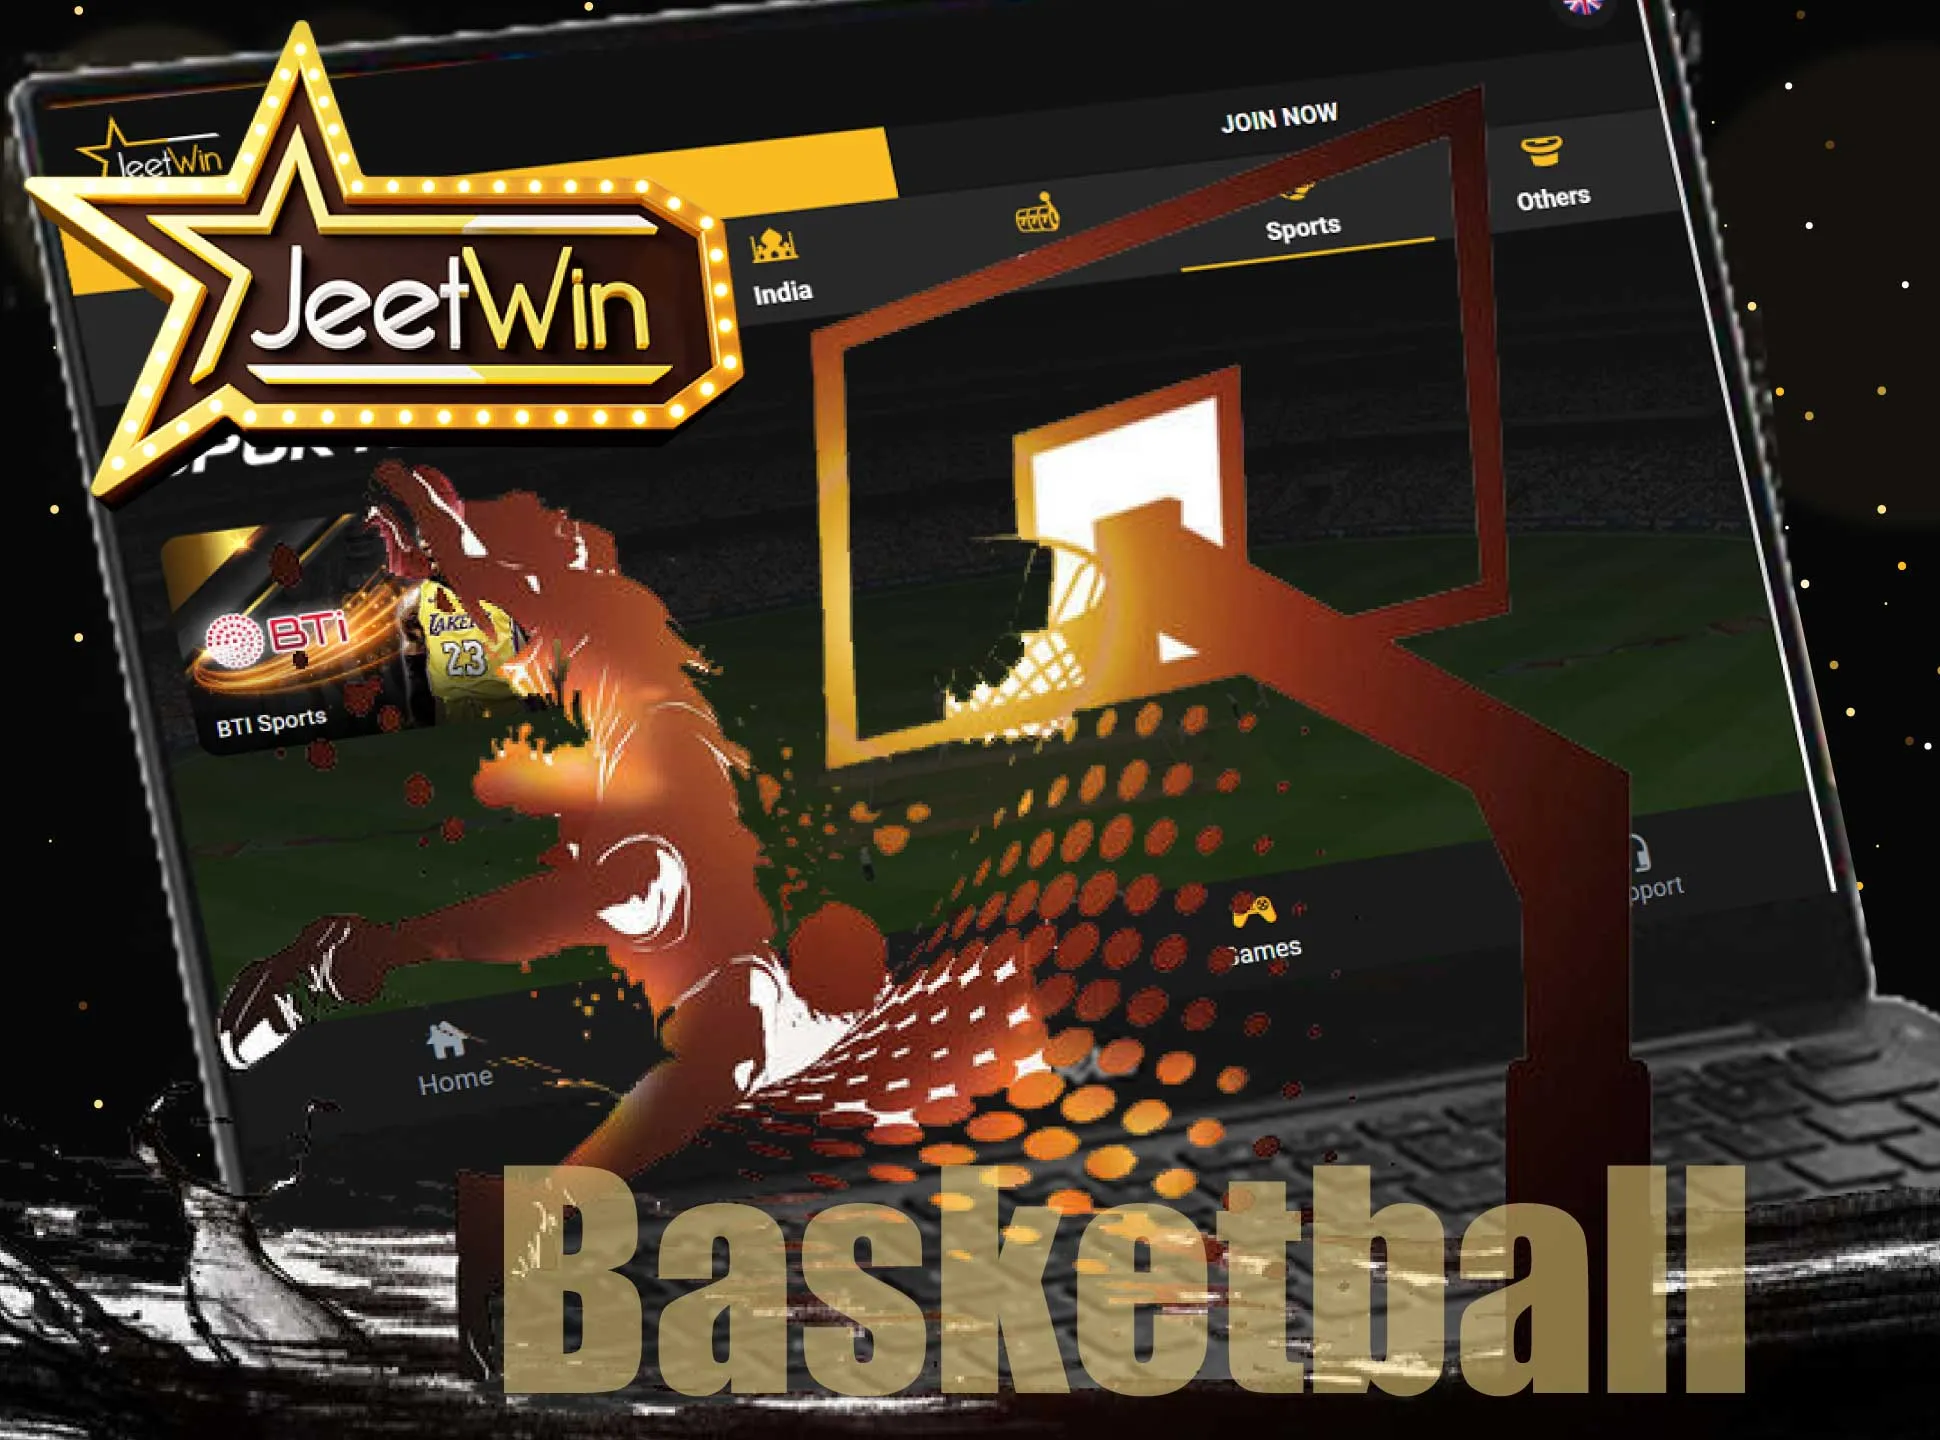 You can also bet on basketball matches and win money on Jeetwin.